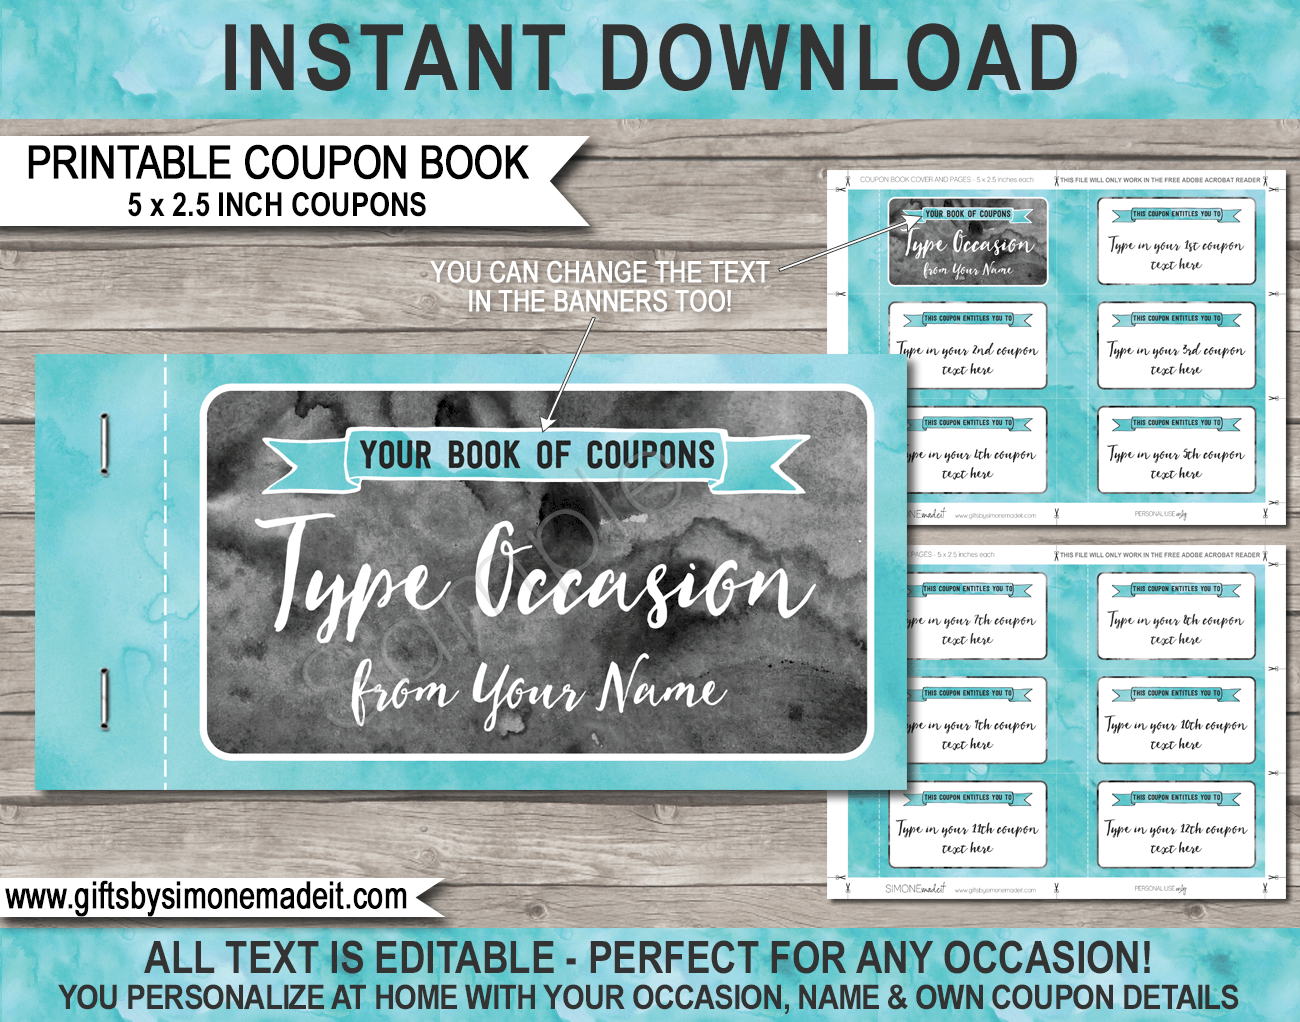 https://www.giftsbysimonemadeit.com/wp-content/uploads/2020/08/Any-Occasion-AQUA-Coupon-Book-Printable-Template.png